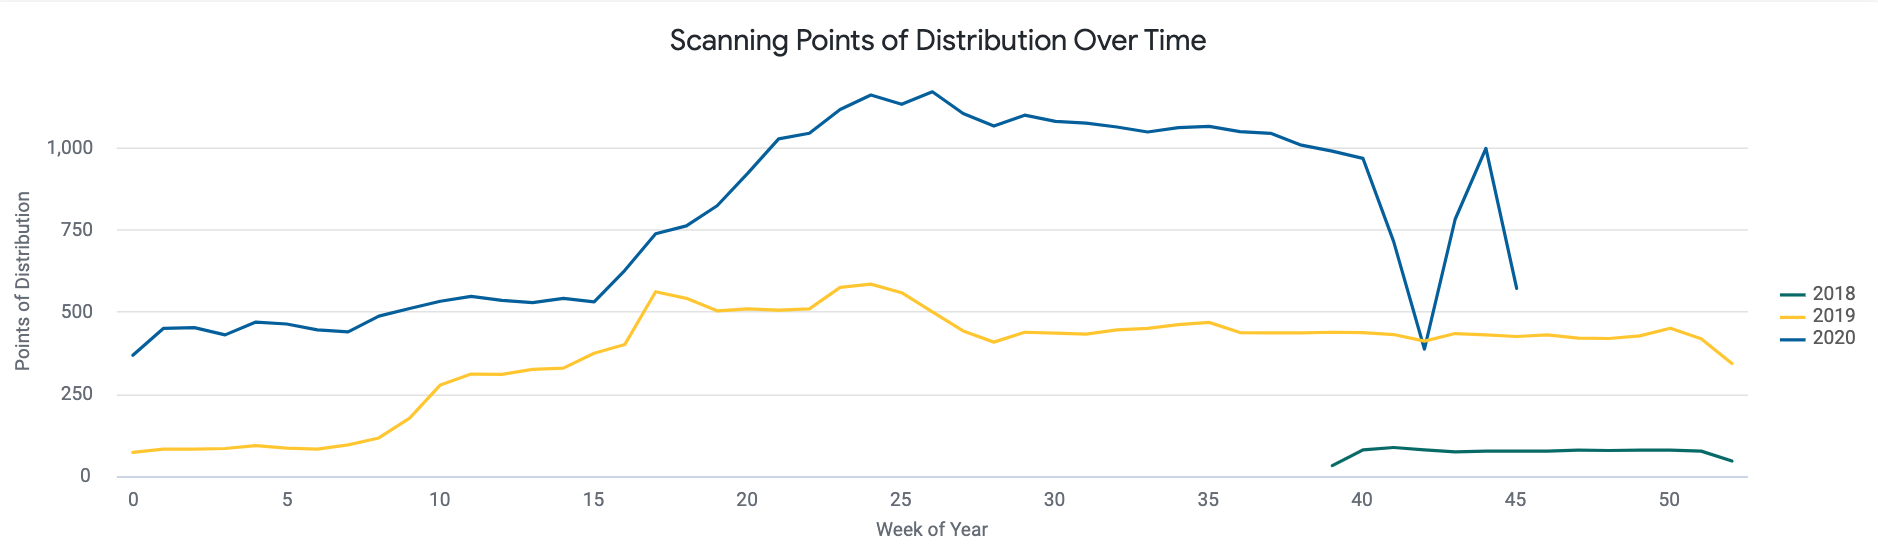 Scanning_Points_of_Distribution_Over_Time.png